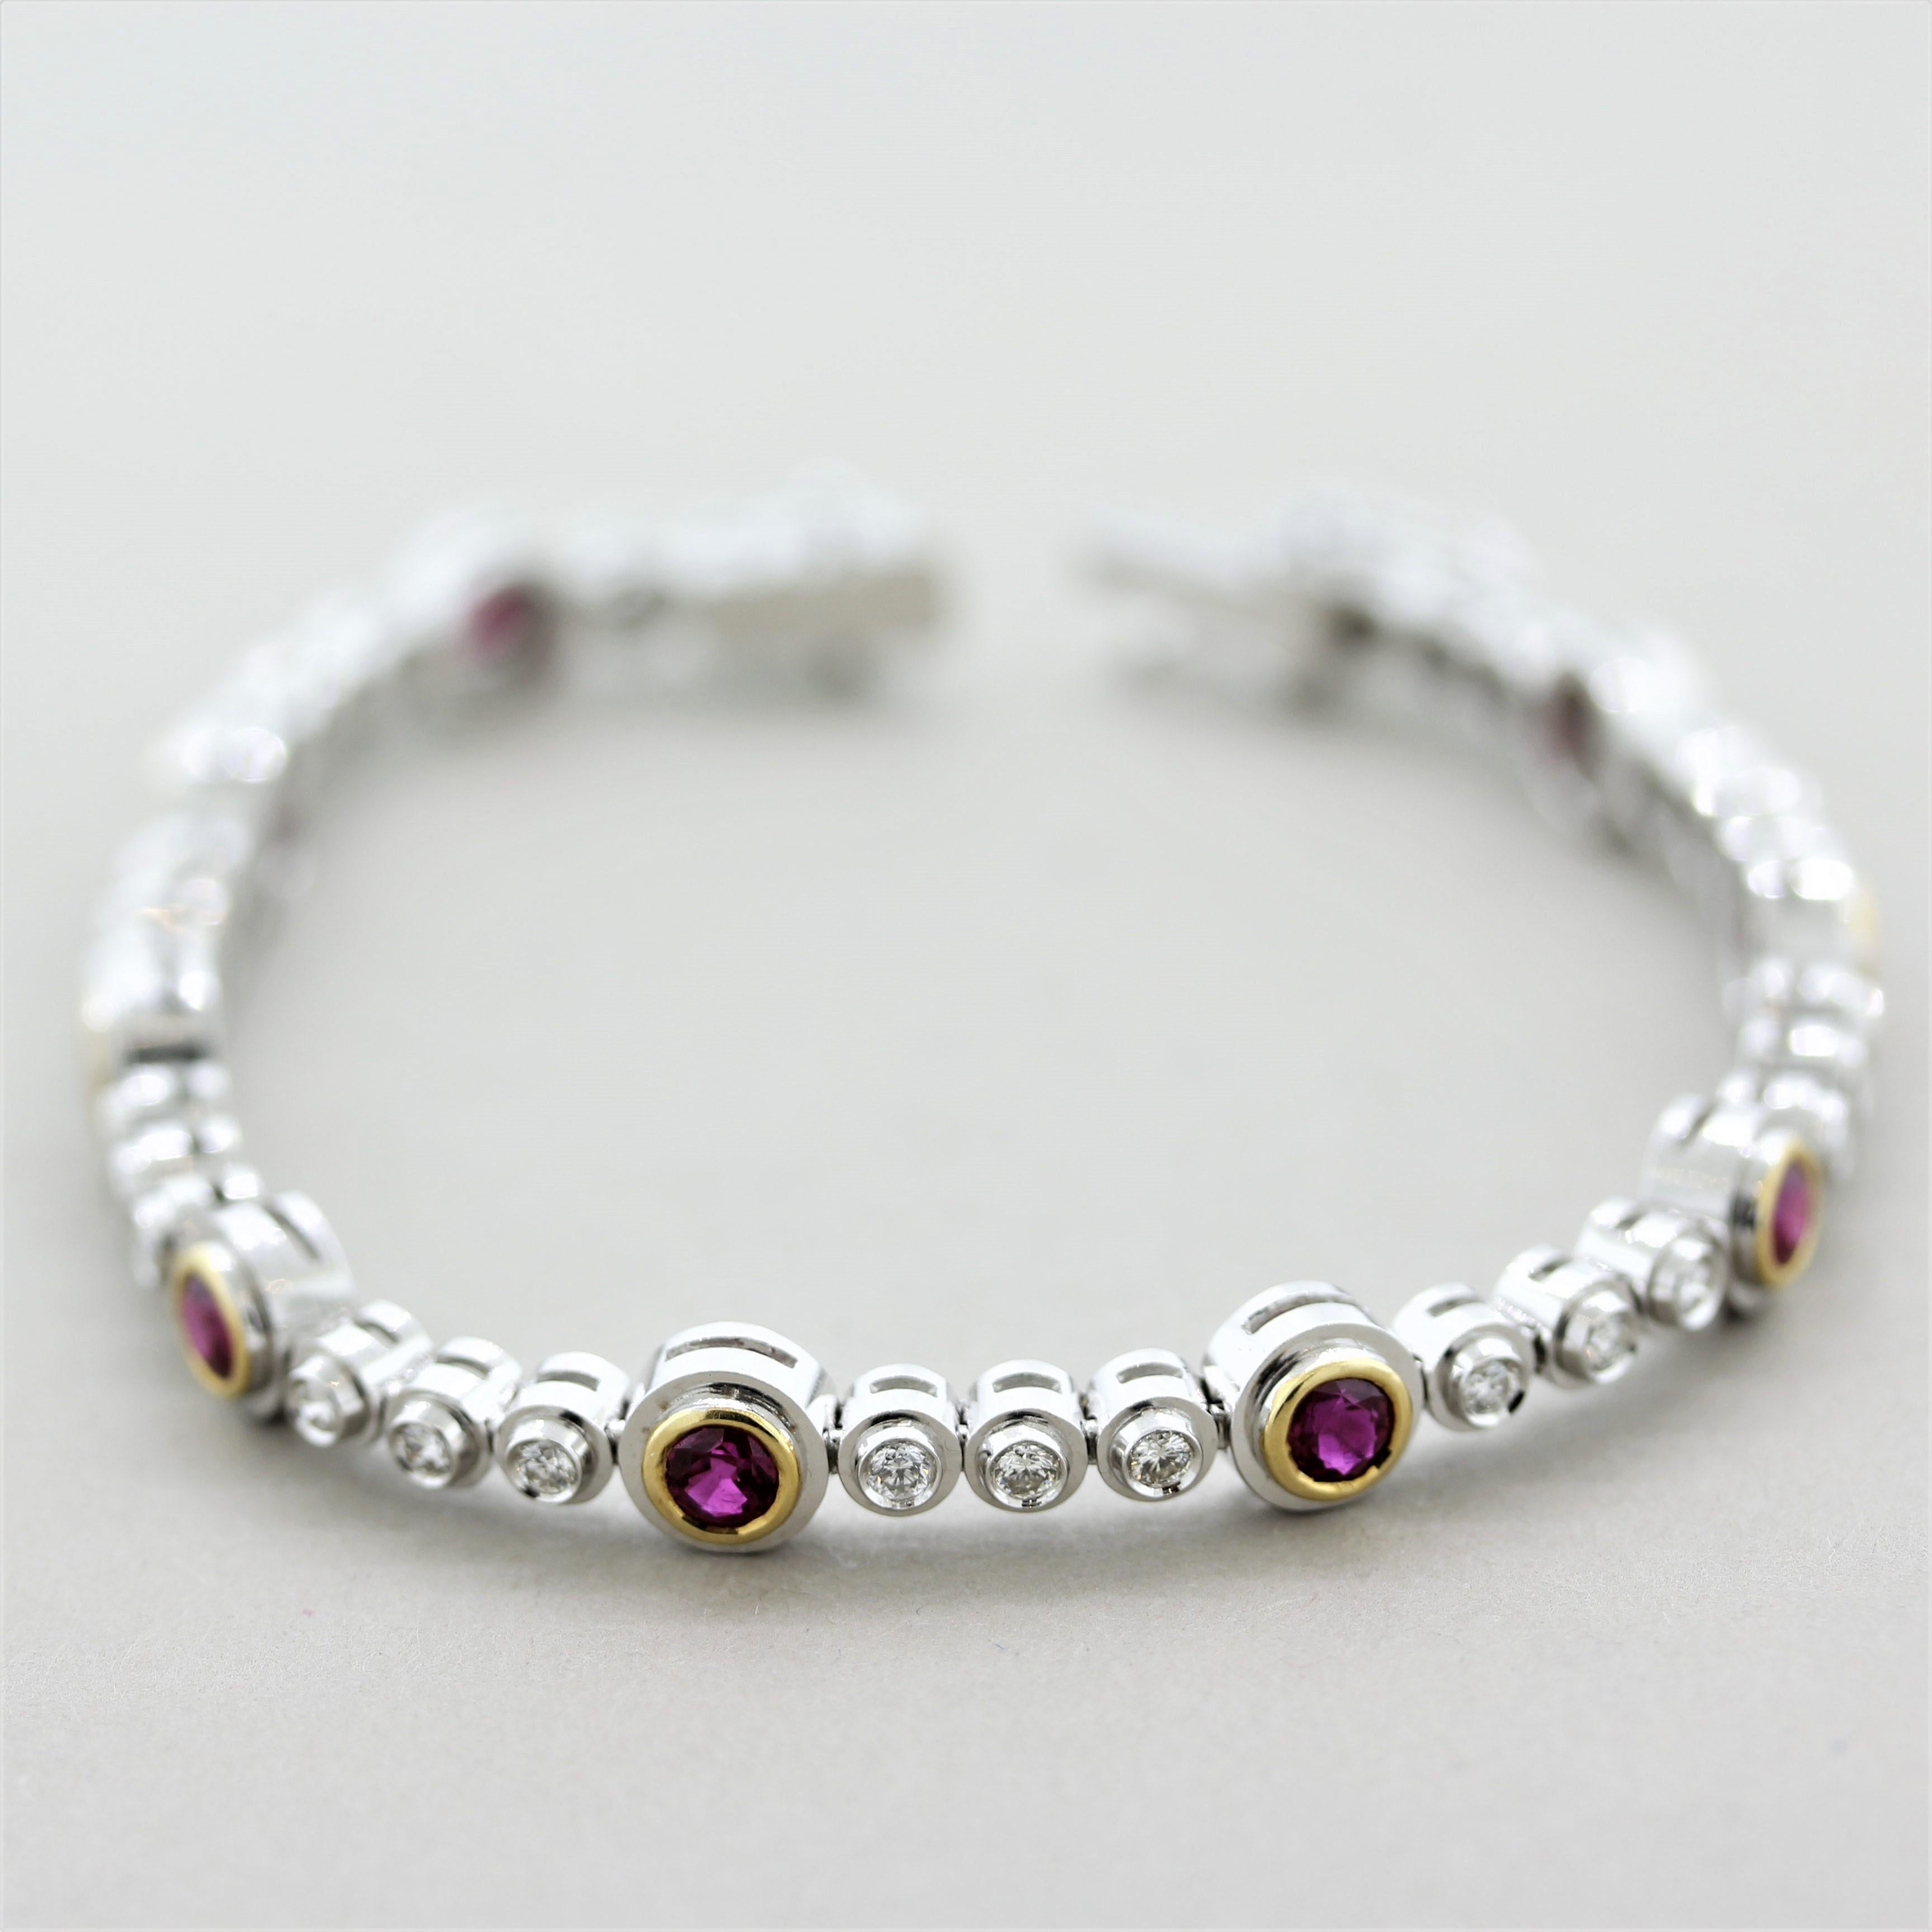 A sweet and stylish bracelet featuring fine top gem rubies and bright white diamonds. There are 9 perfectly matching rubies with vivid red pigeon blood color, which weigh a total of 2.81 carats. They are accented by round brilliant-cut diamonds